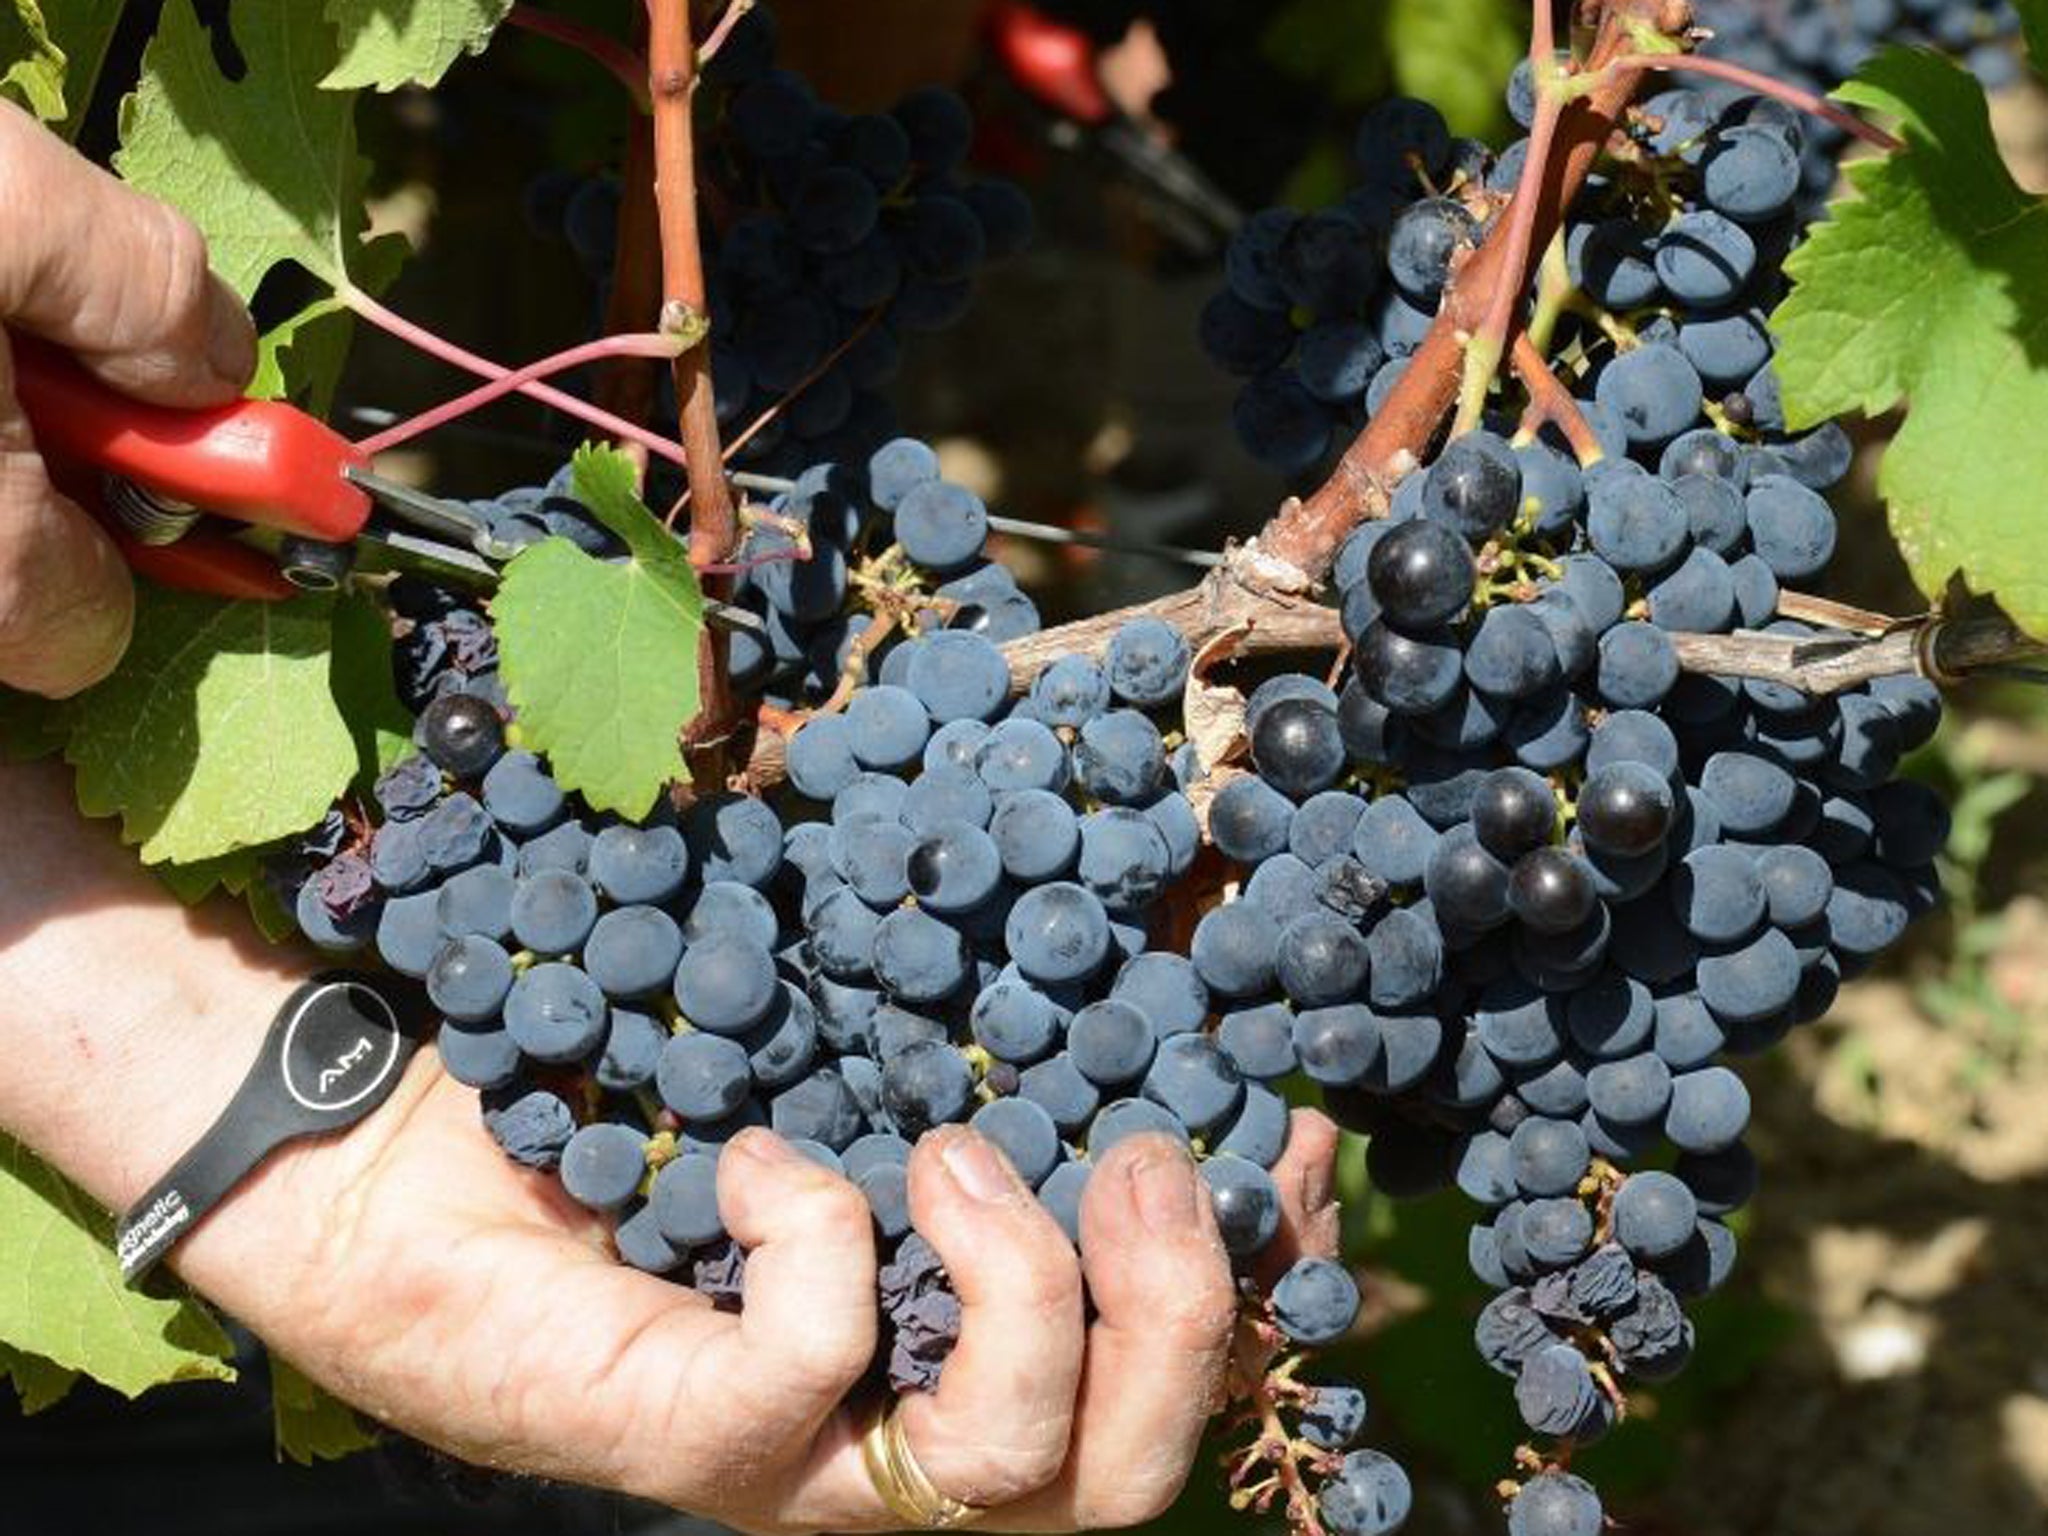 Vineyards had a fine harvest, but the product may be 'overpriced'